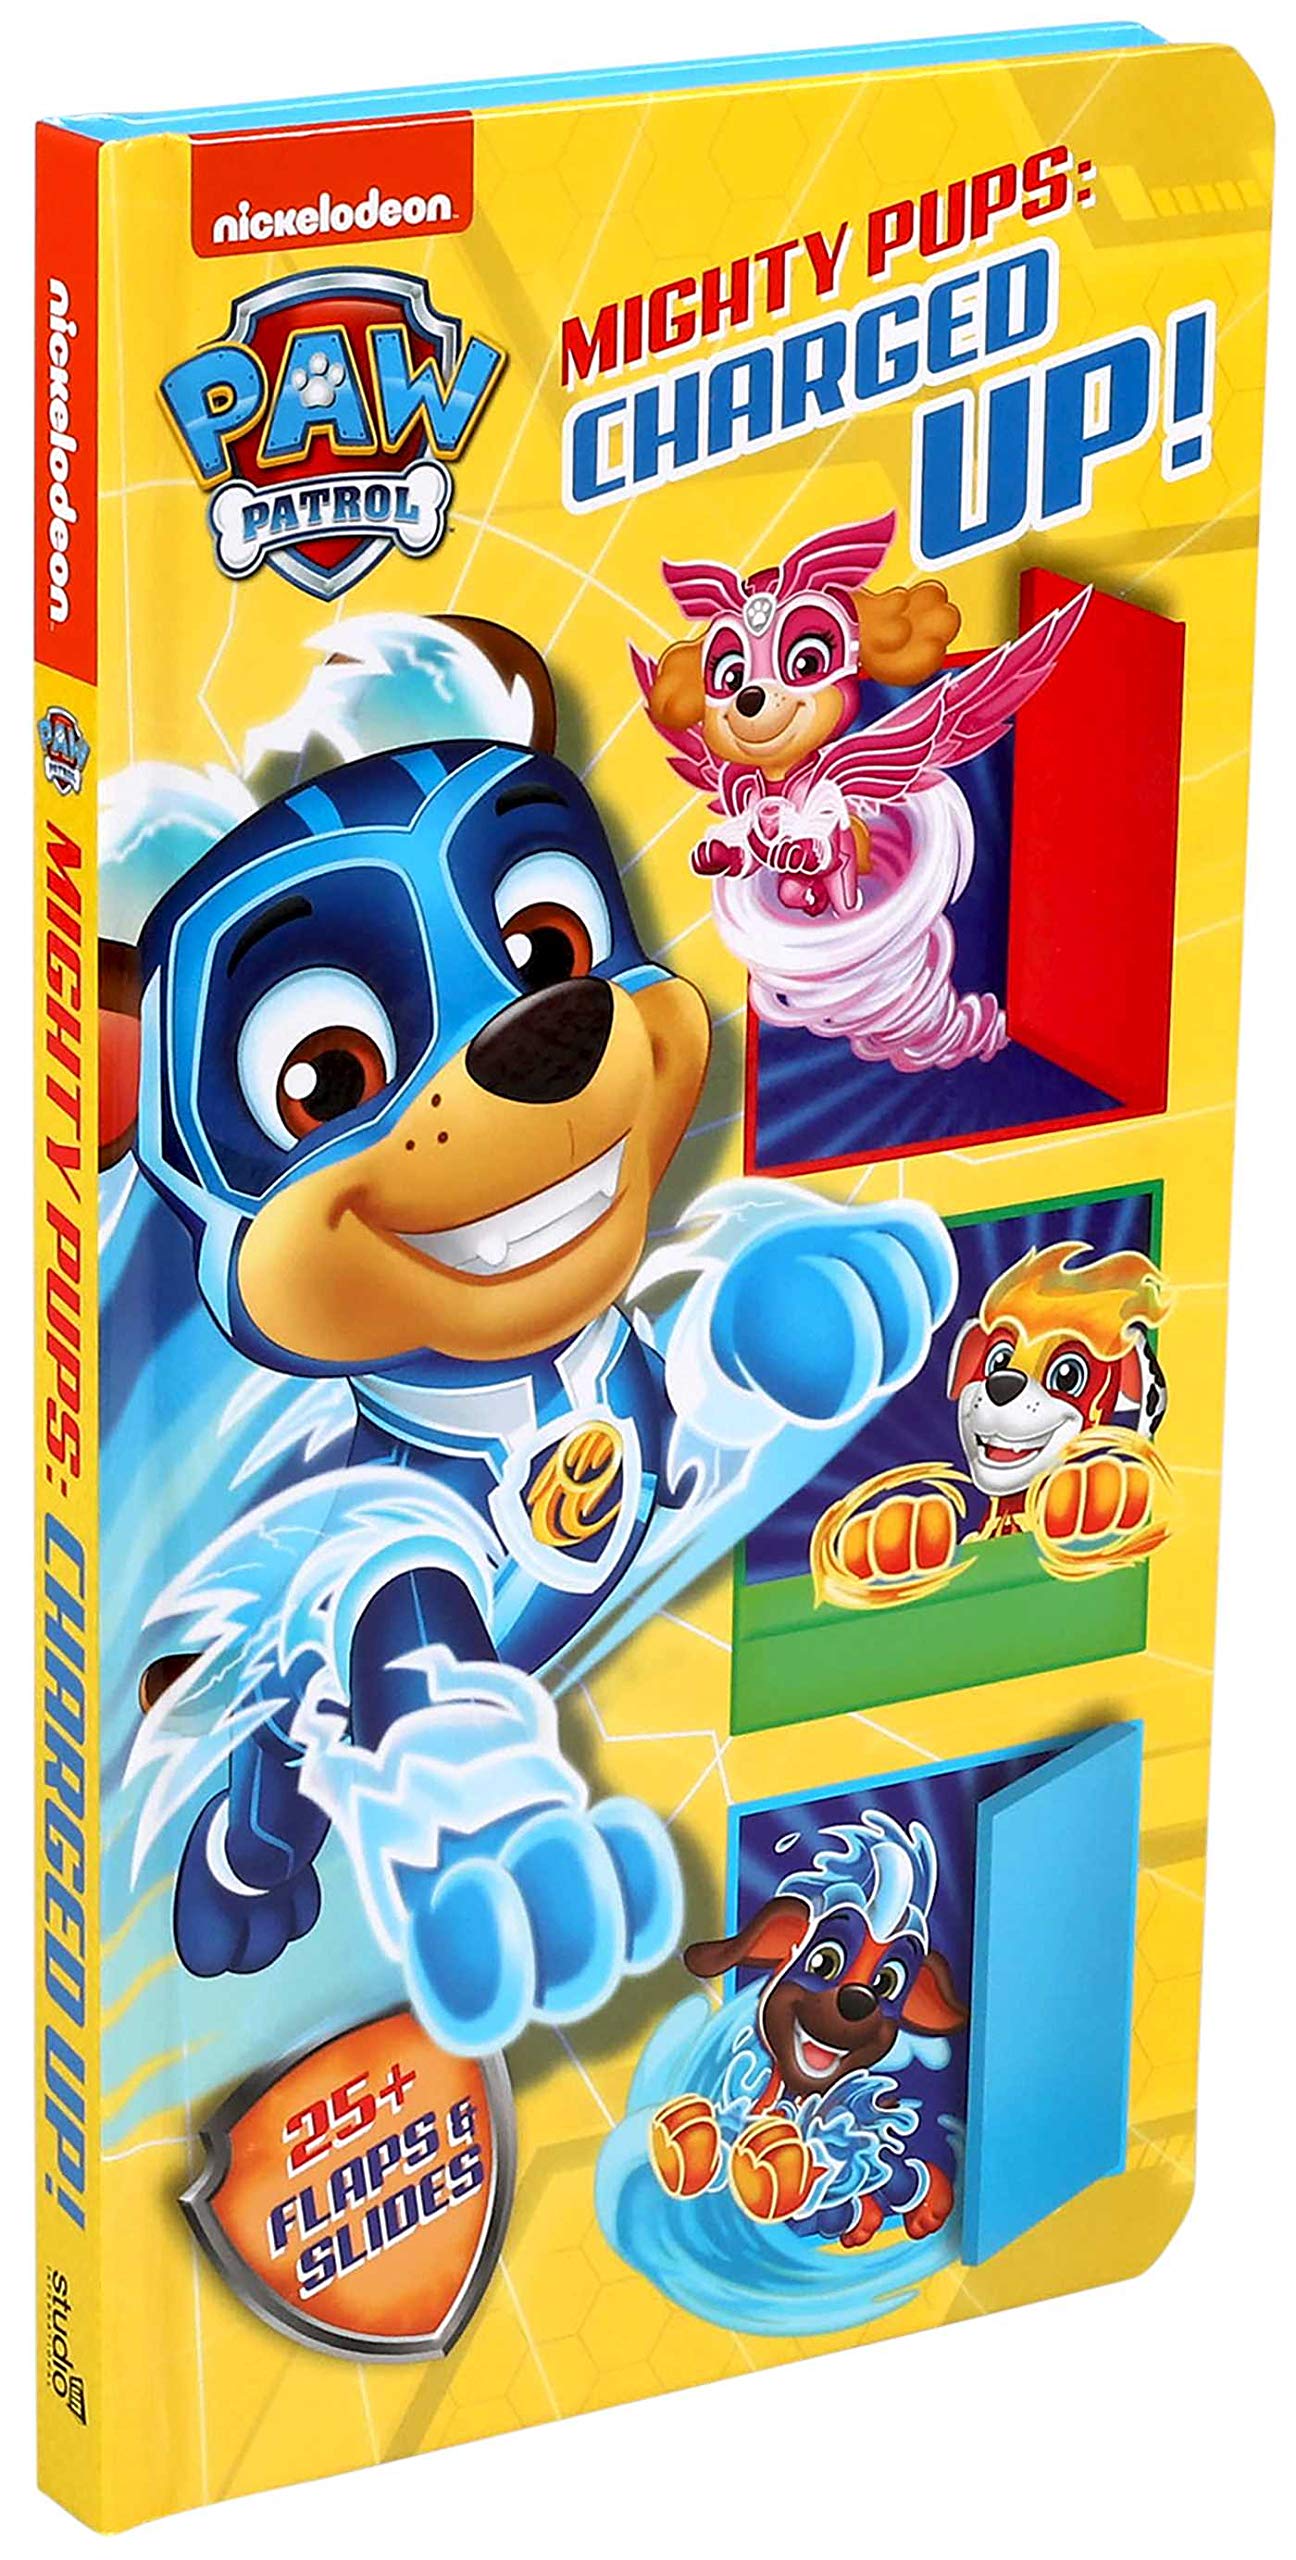 Nickelodeon Paw Patrol Mighty Pups Charged Up!